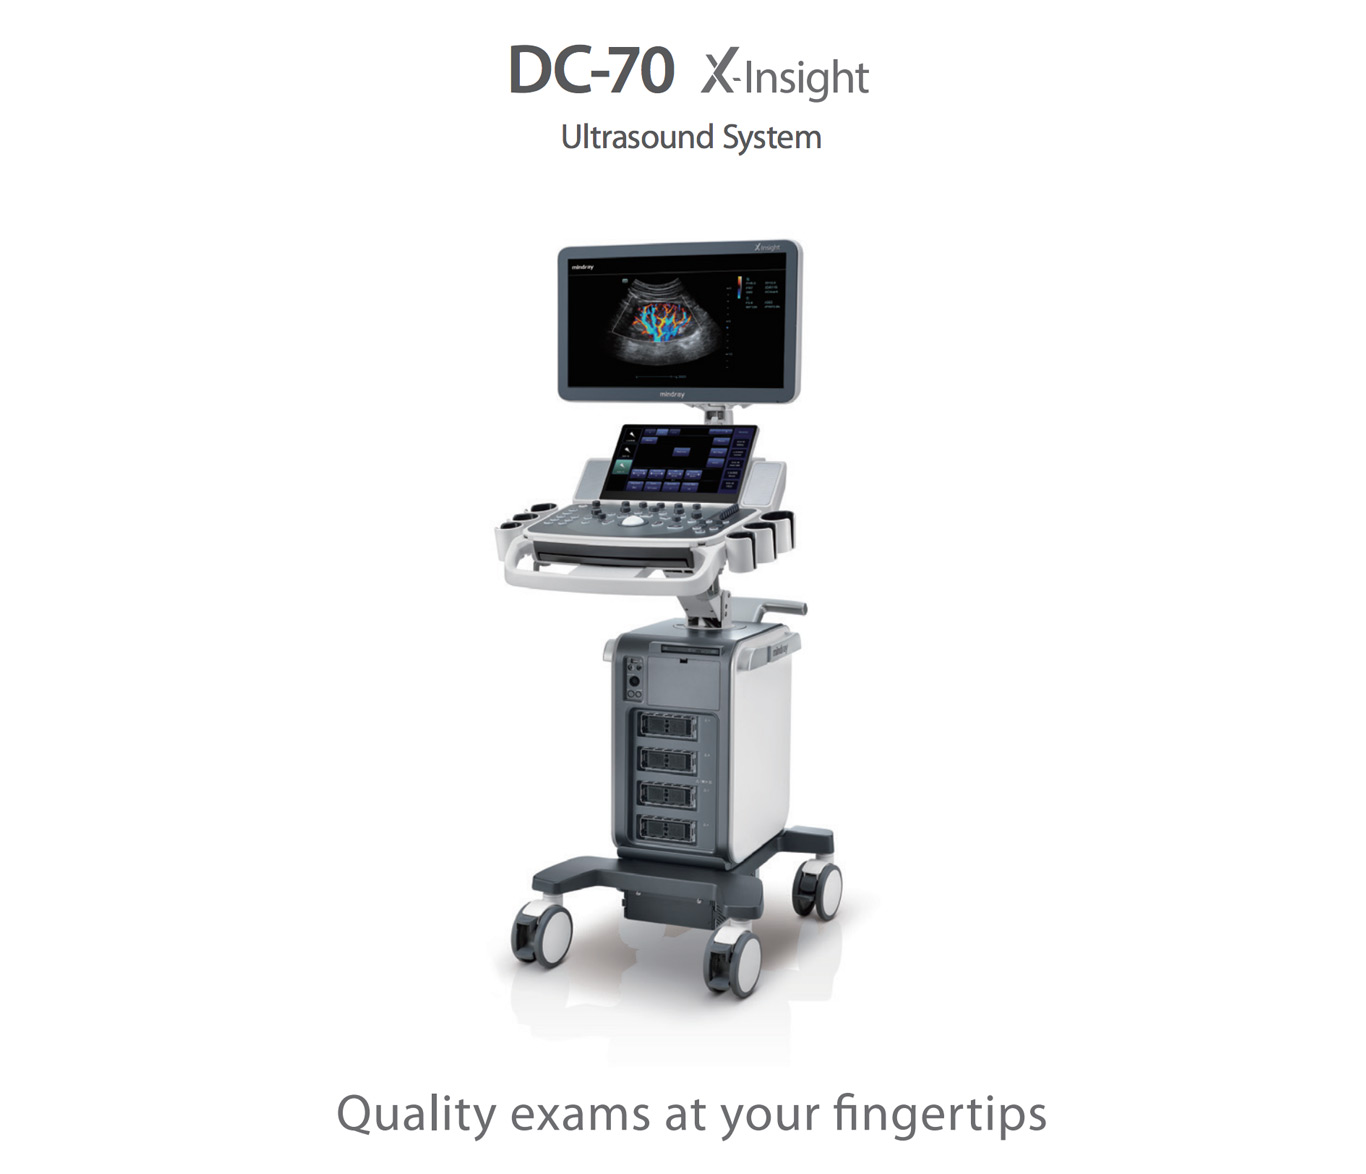 DC-70X Ultrasound System for Vein Practices